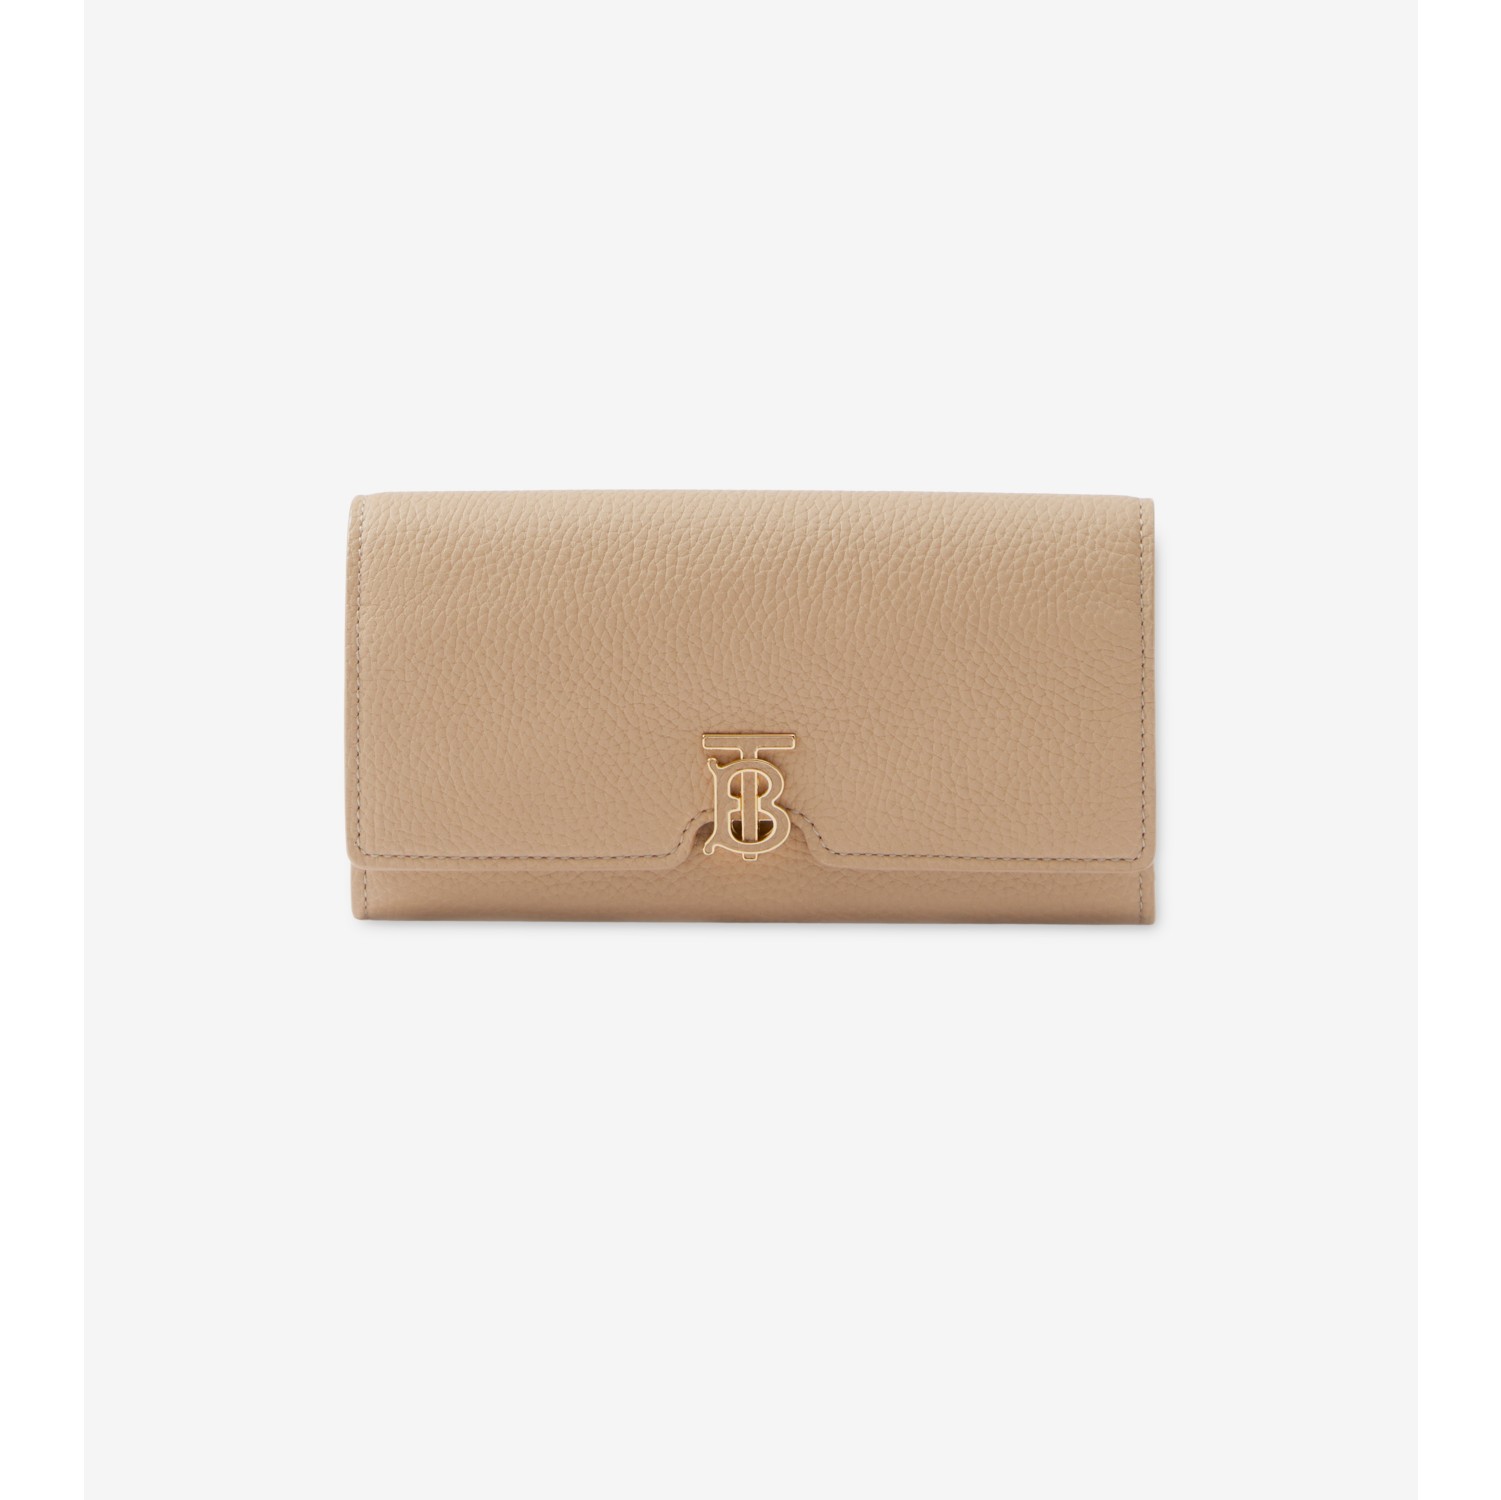 Grainy Leather TB Continental Wallet in Oat beige - Women | Burberry® Official